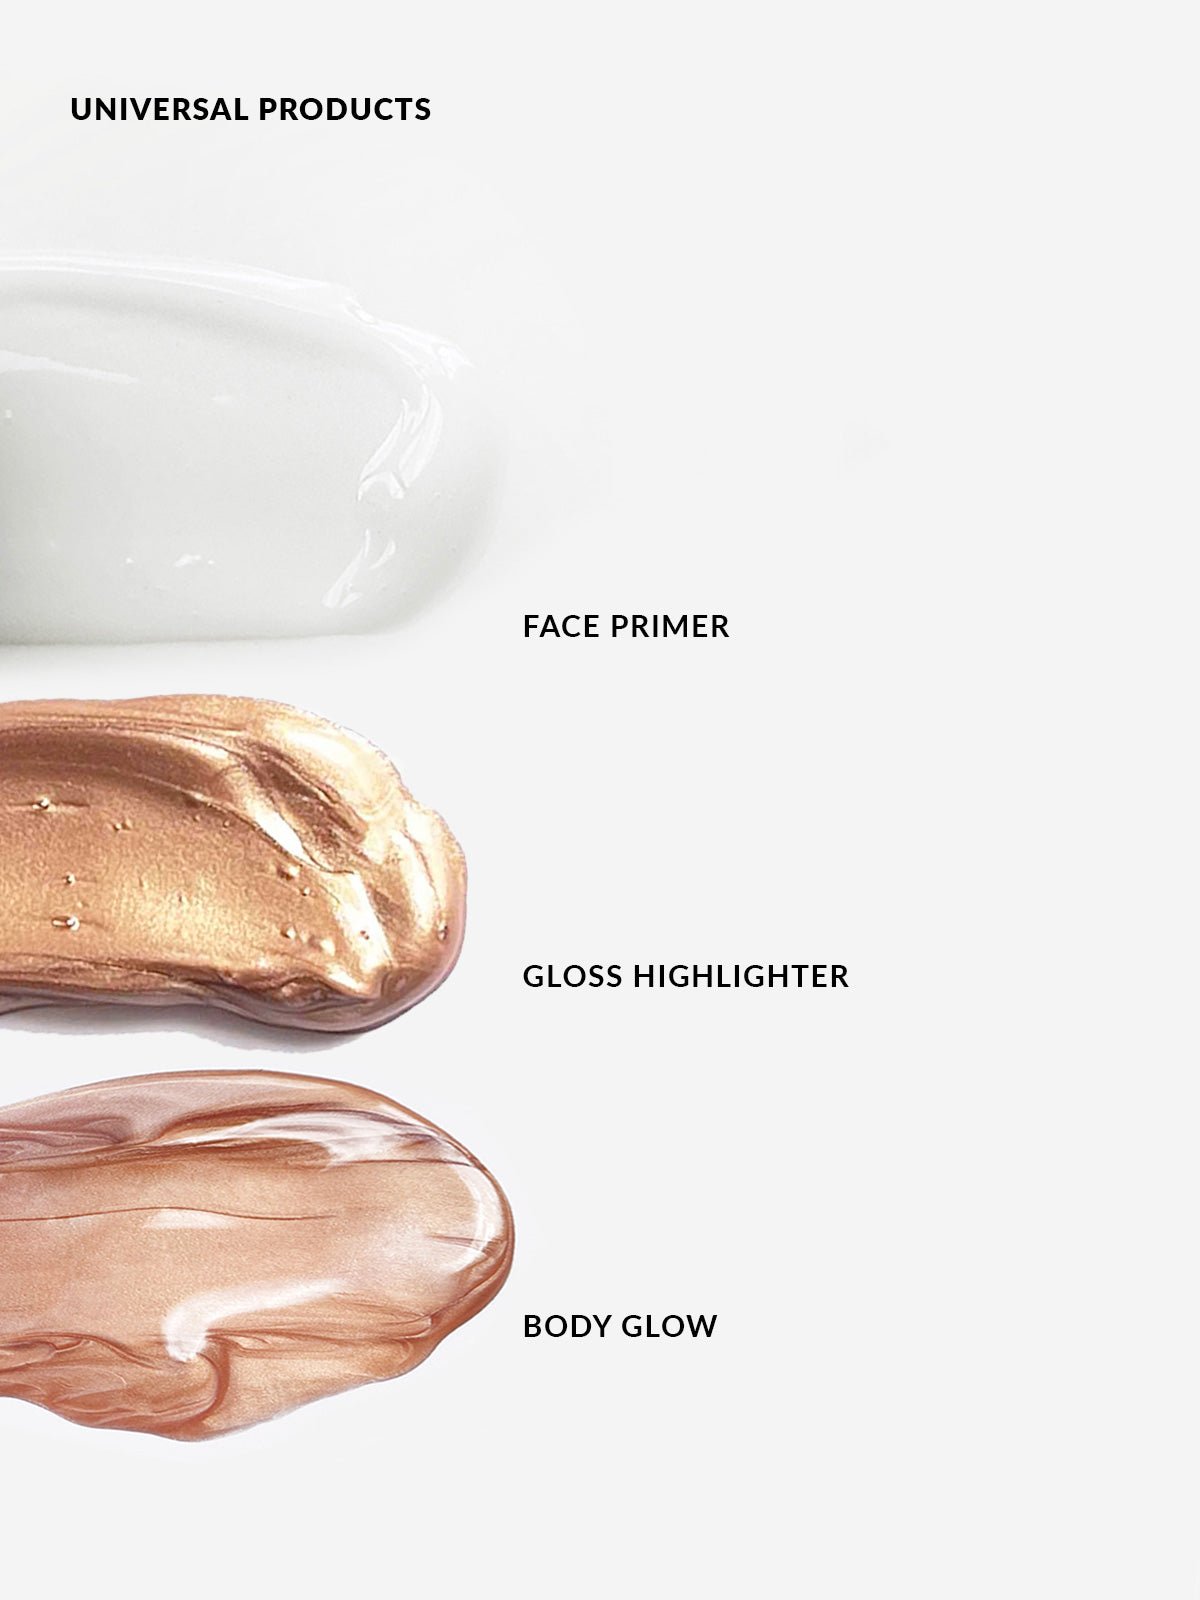 REFY FACE & BODY UNIVERSAL PRODUCTS SHADE SWATCHES